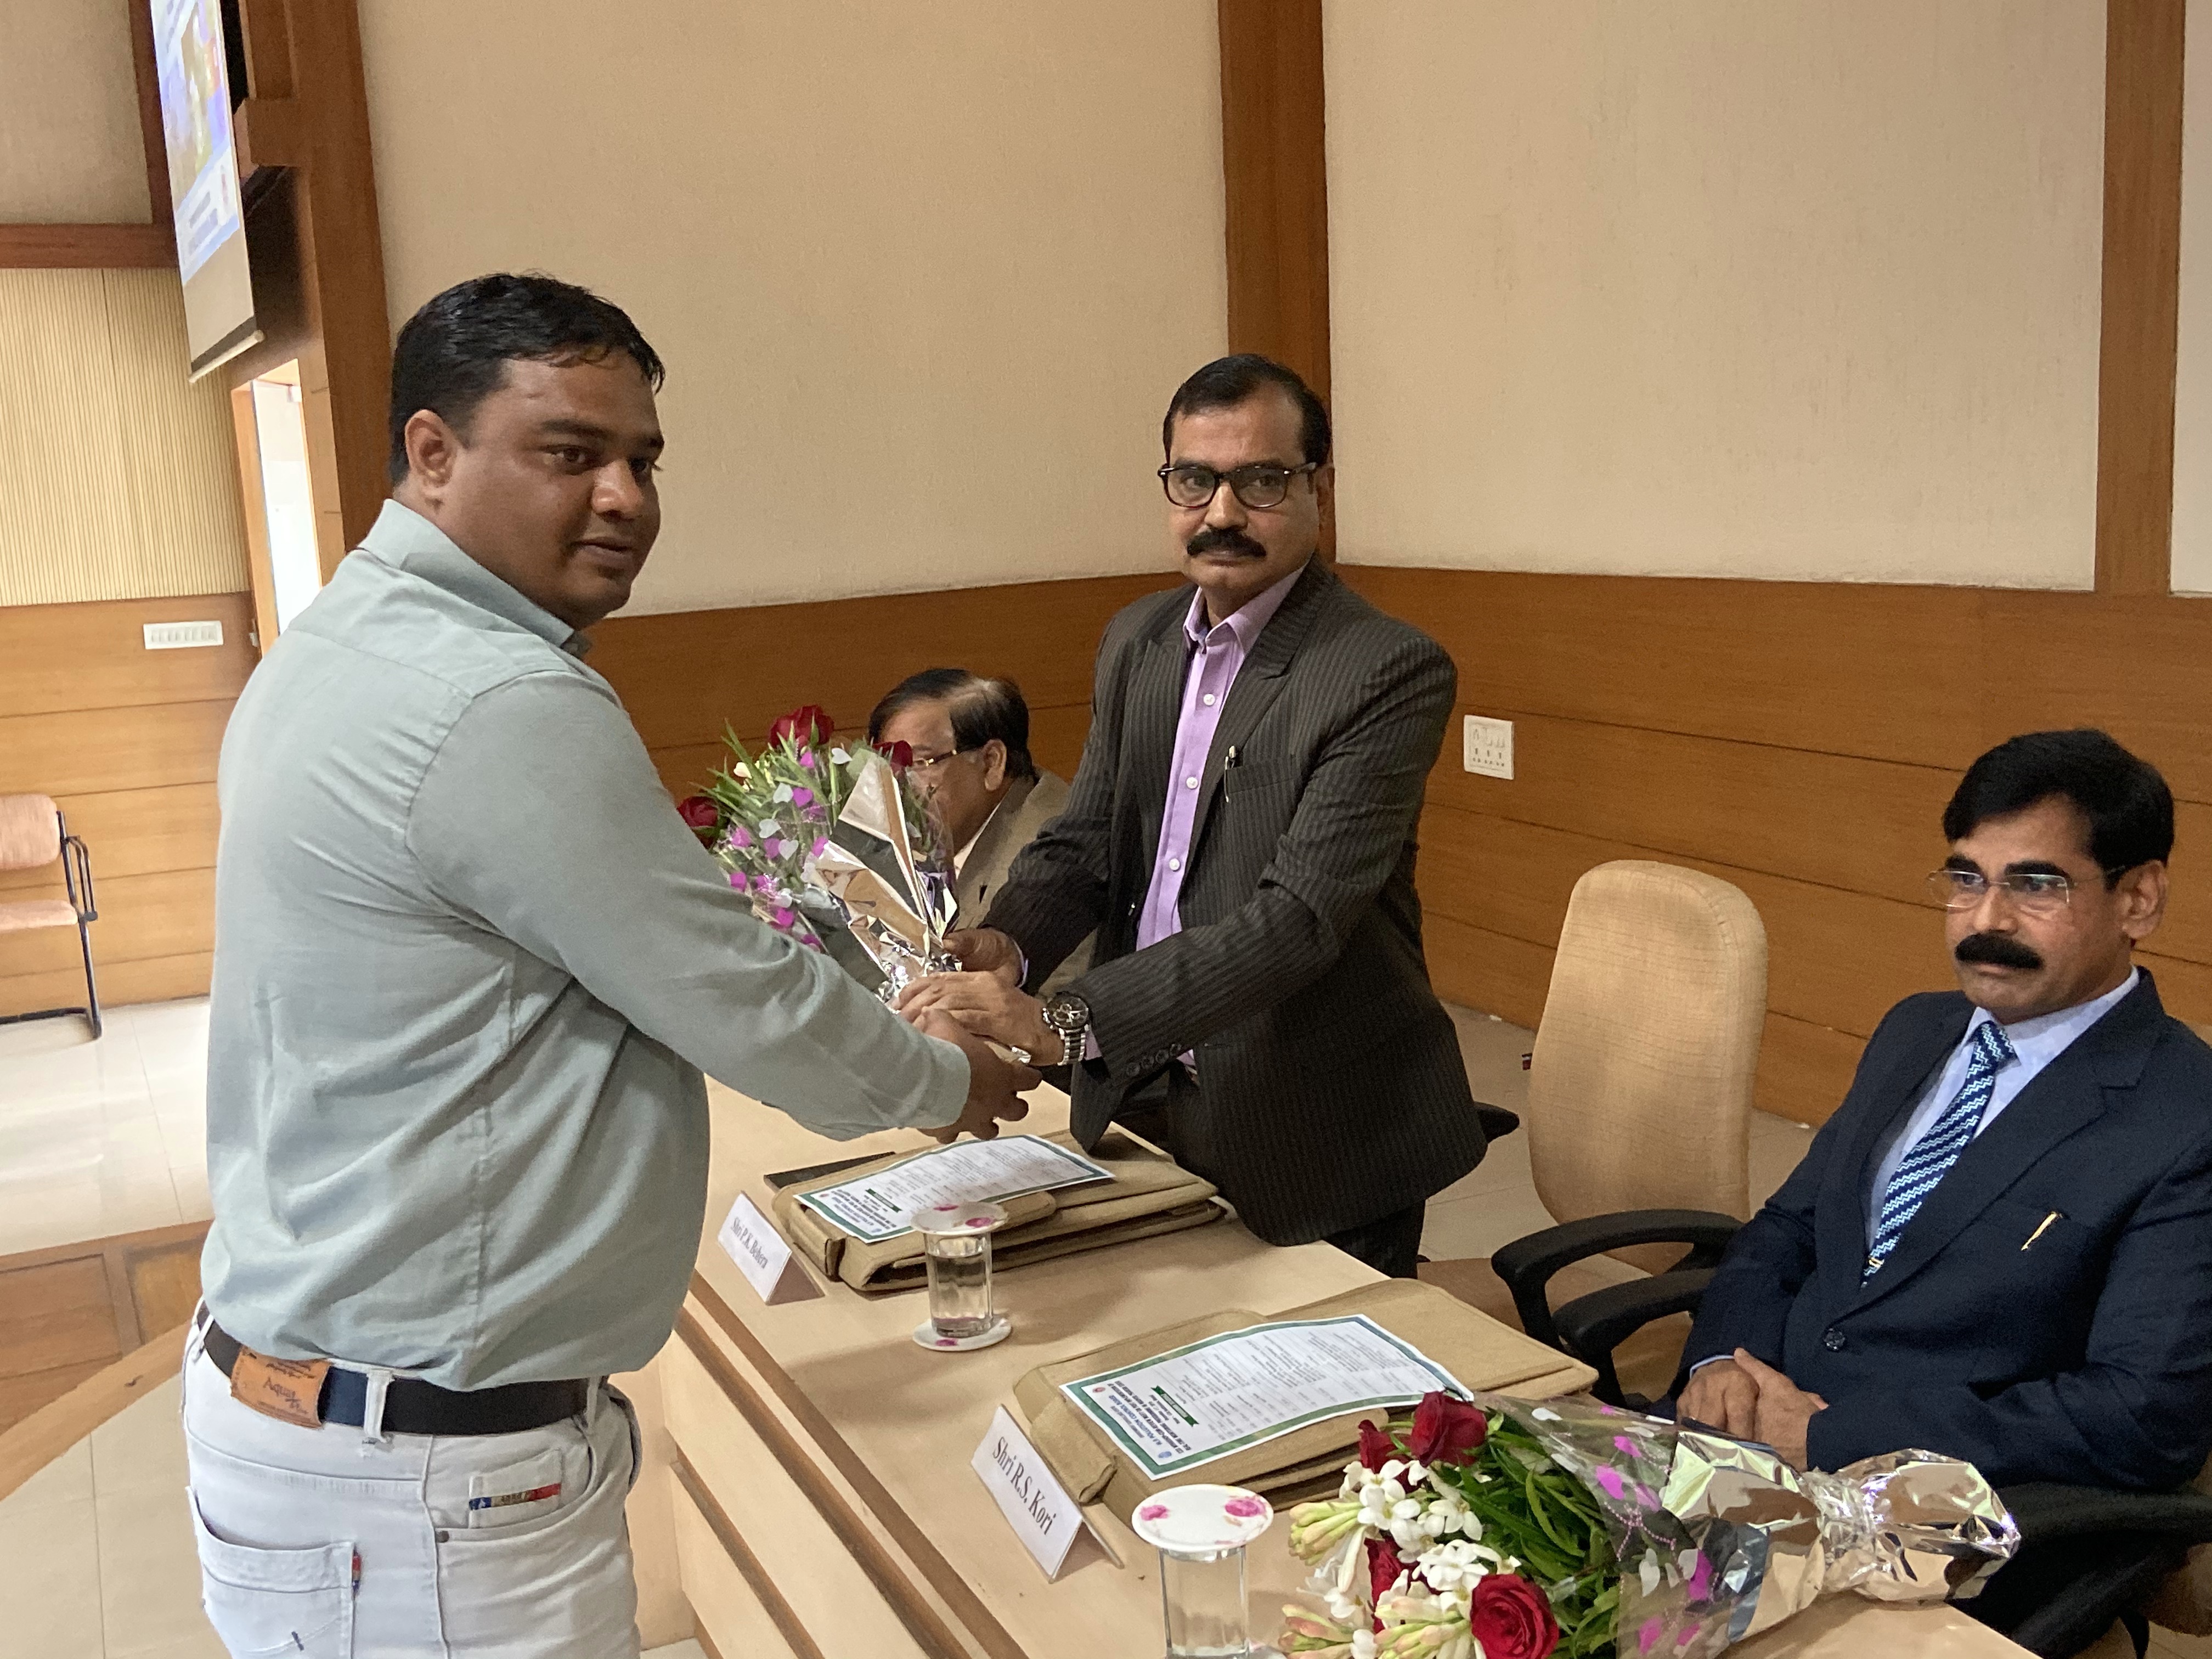 Shri A.A. Mishra, Member Secretary, MPPCB being greeted at workshop